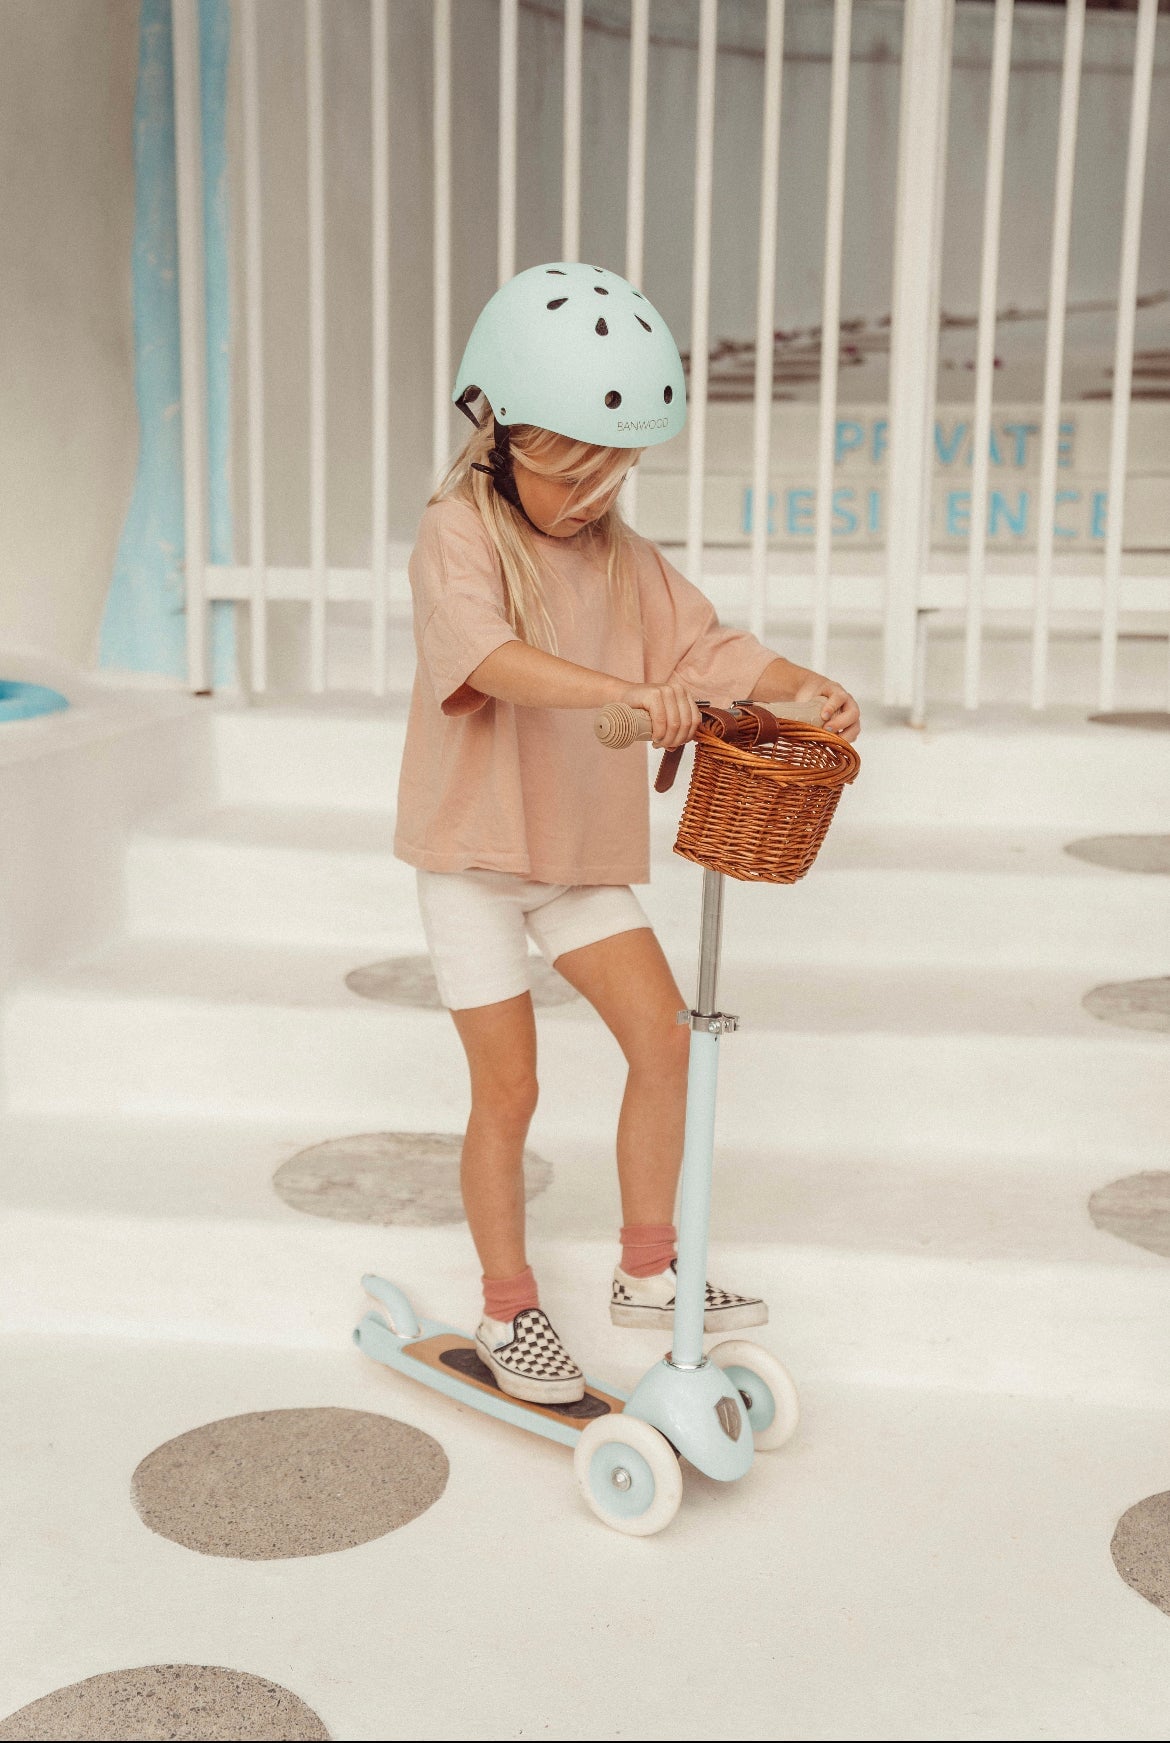 Kick Scooter (Three-Wheel) by BANWOOD, Multiple Colors Riding Toys - Alder & Alouette